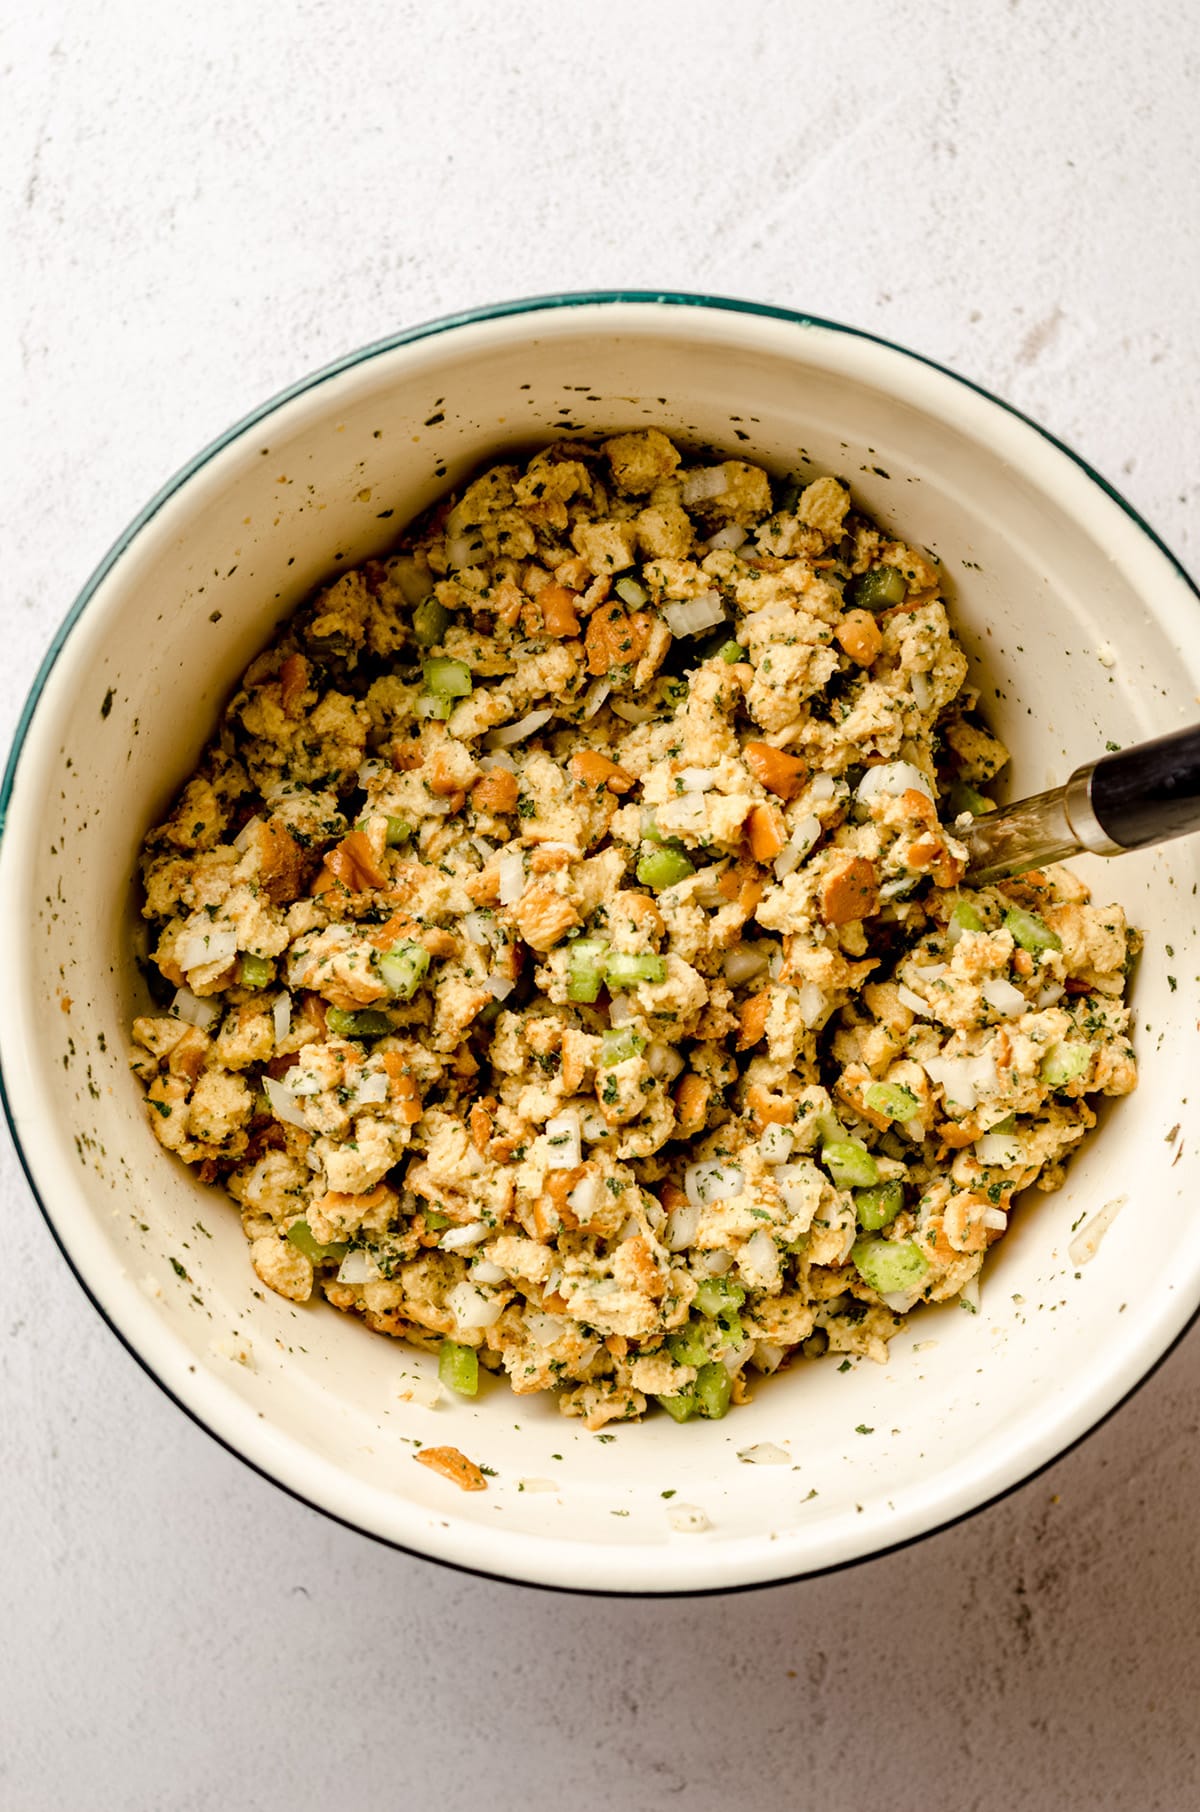 bread stuffing in a large bowl ready to be put into a baking dish